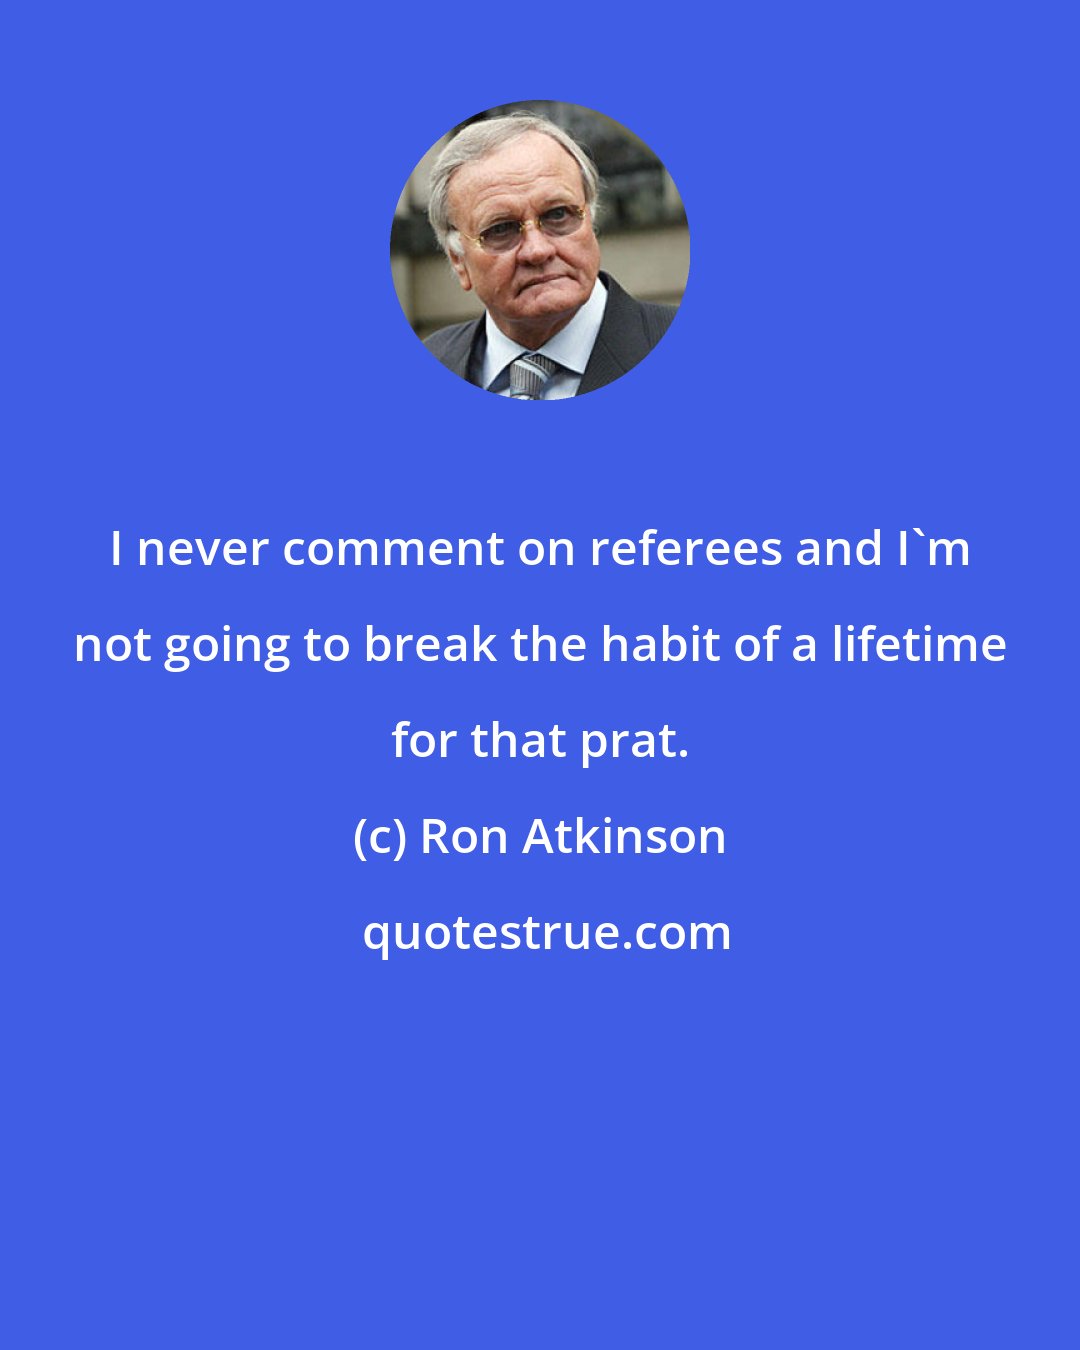 Ron Atkinson: I never comment on referees and I'm not going to break the habit of a lifetime for that prat.